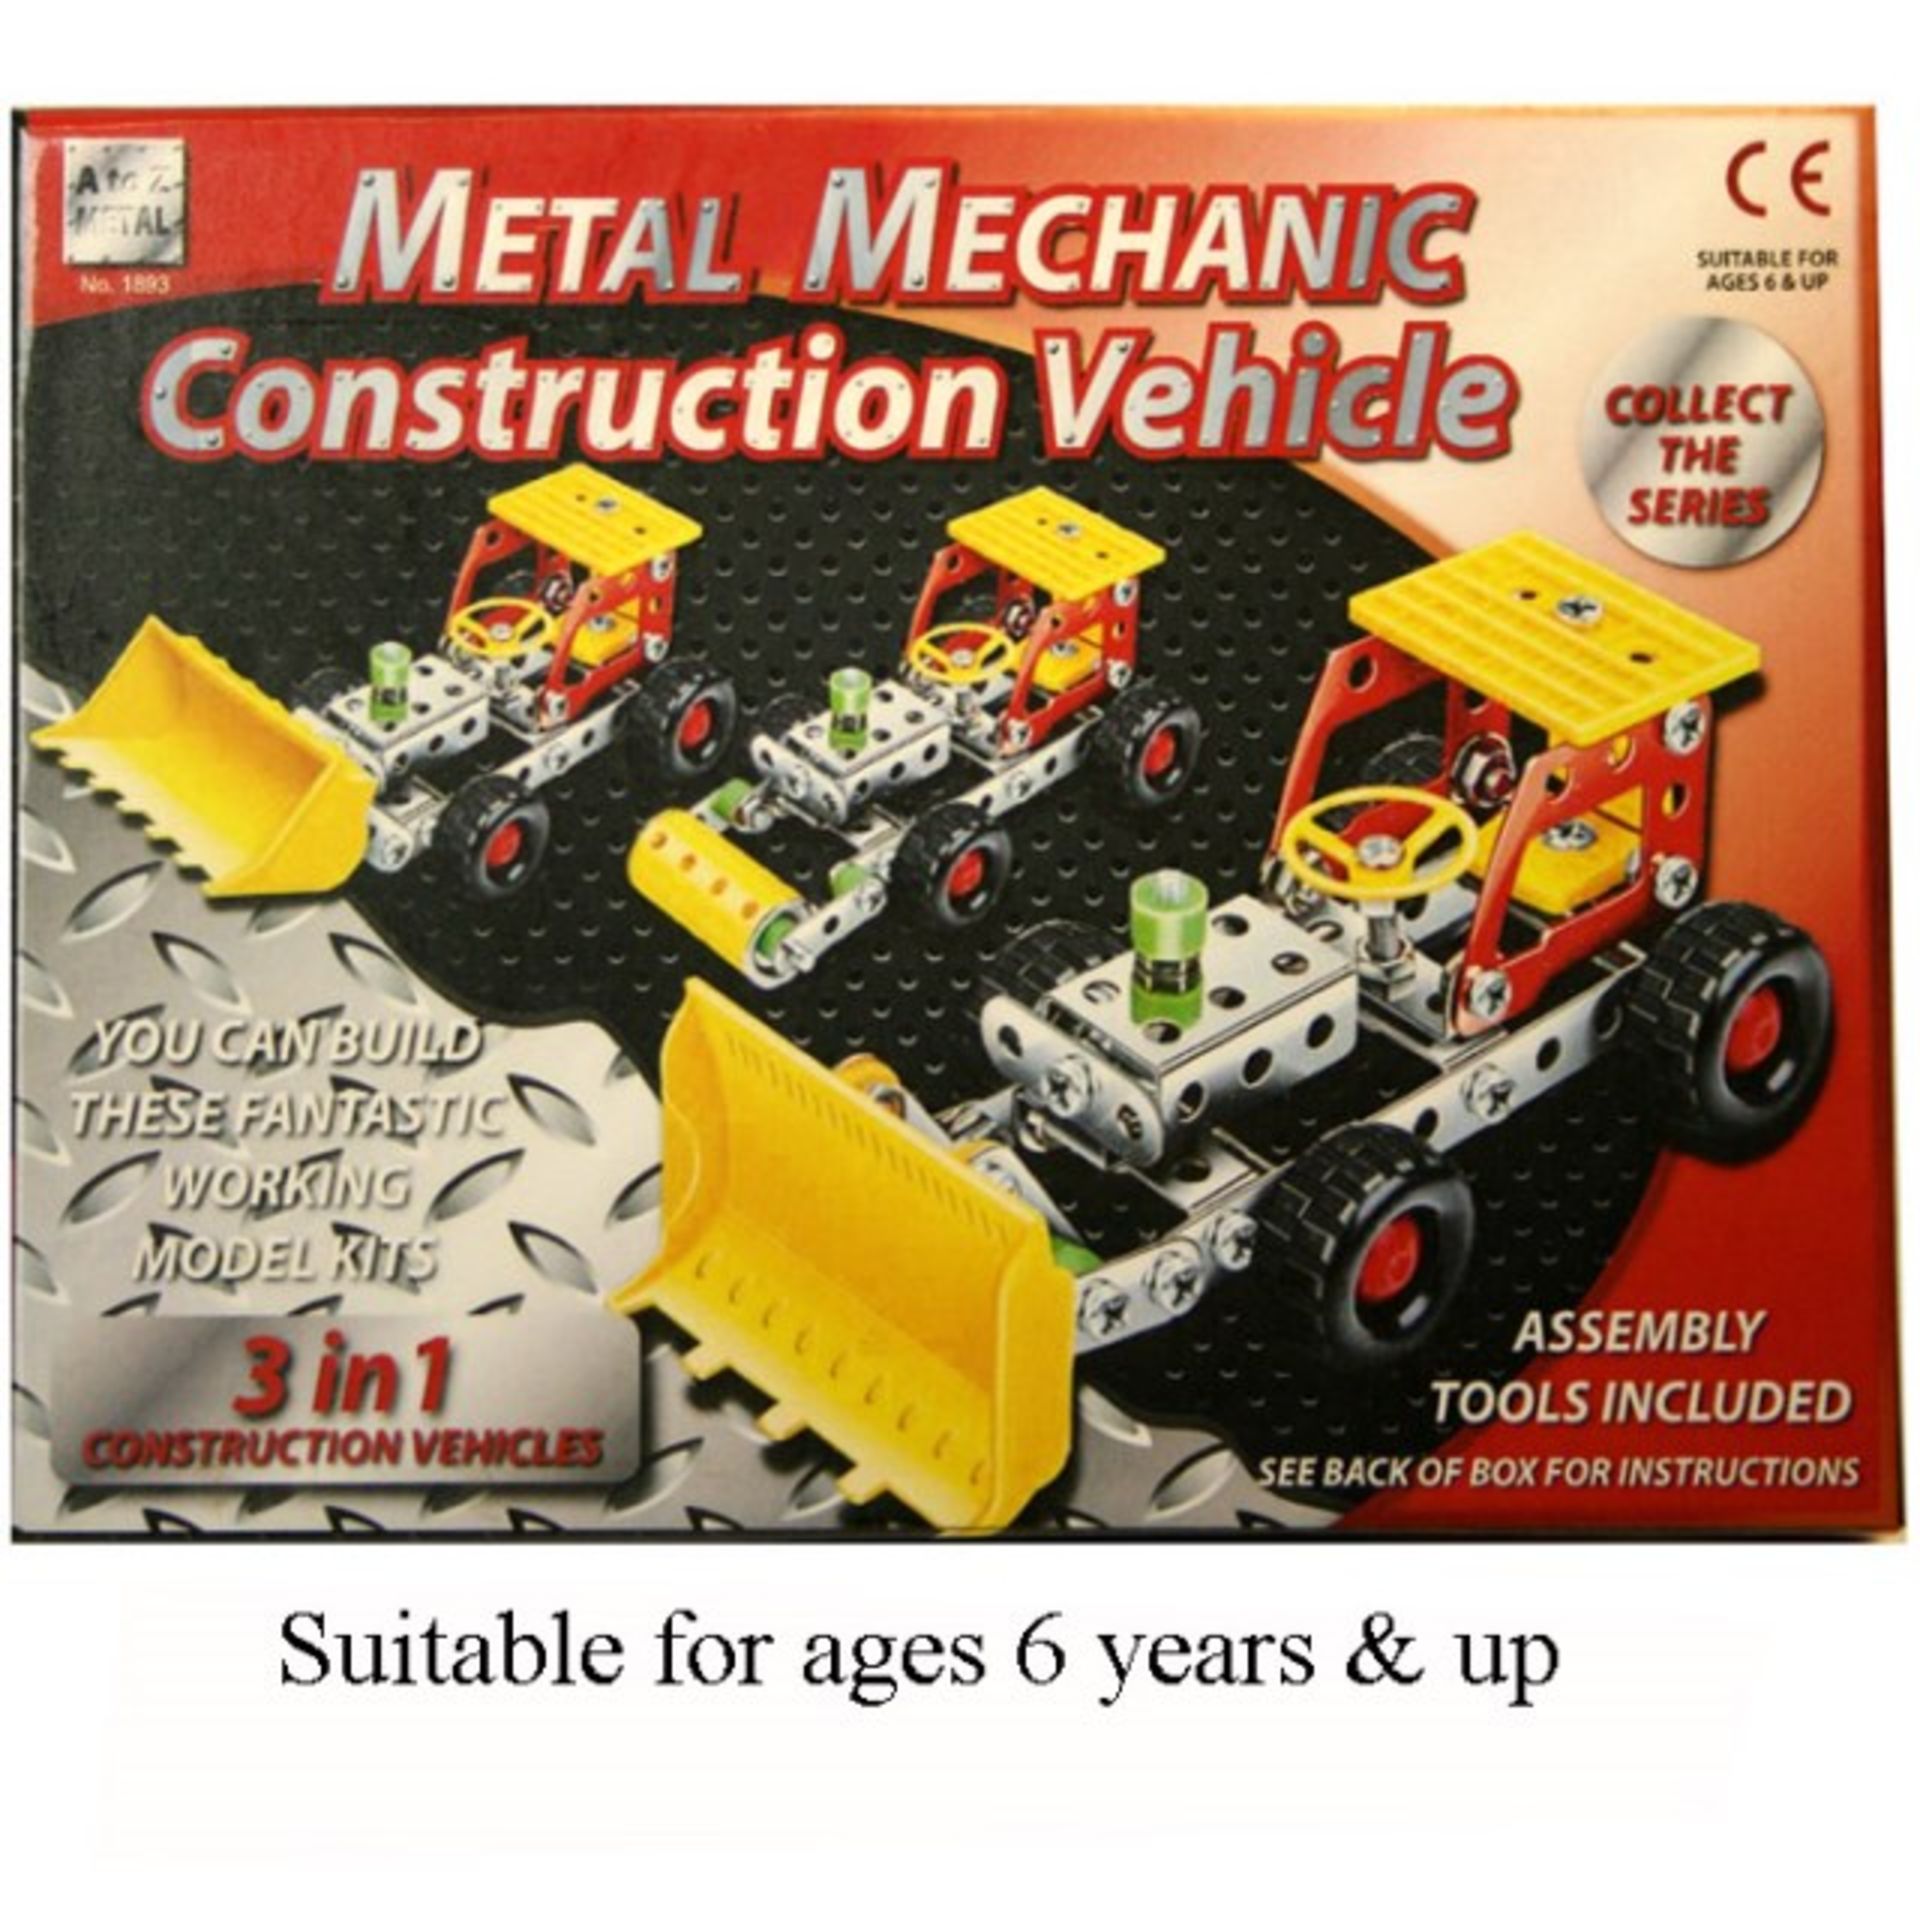 V Brand New 3 in 1 Mecano Type Contrustcion Vehicle Kit Inlcudes Assembly Tools